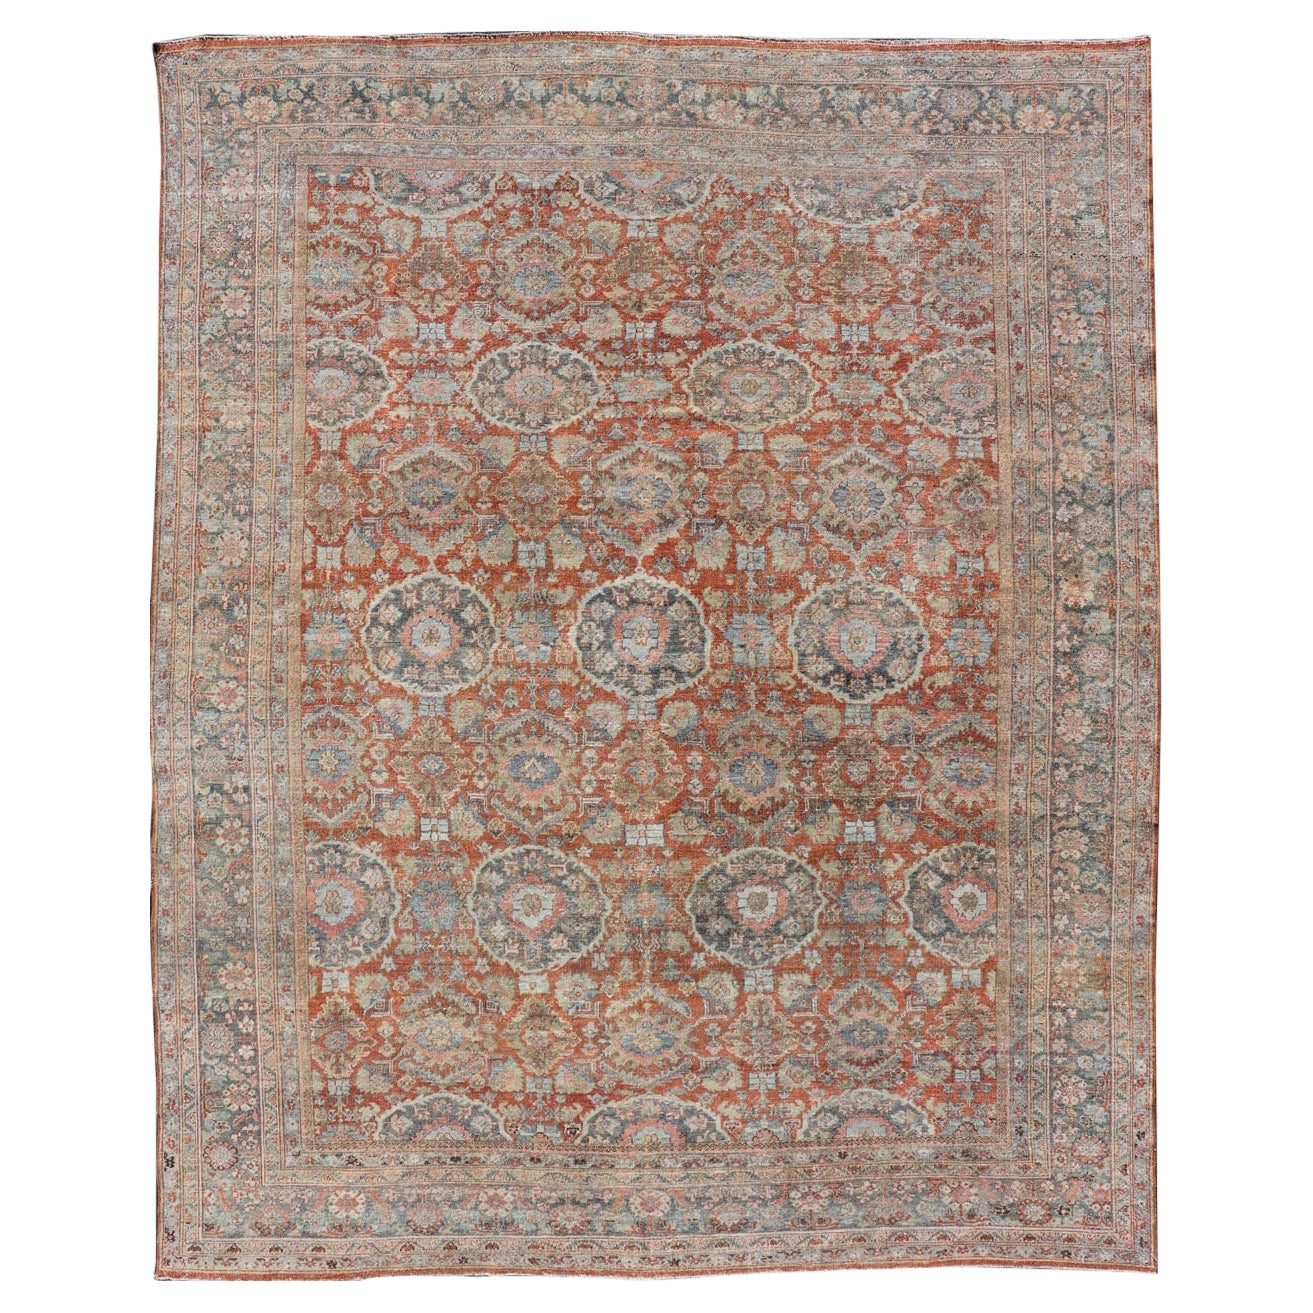 What is a Mahal rug?